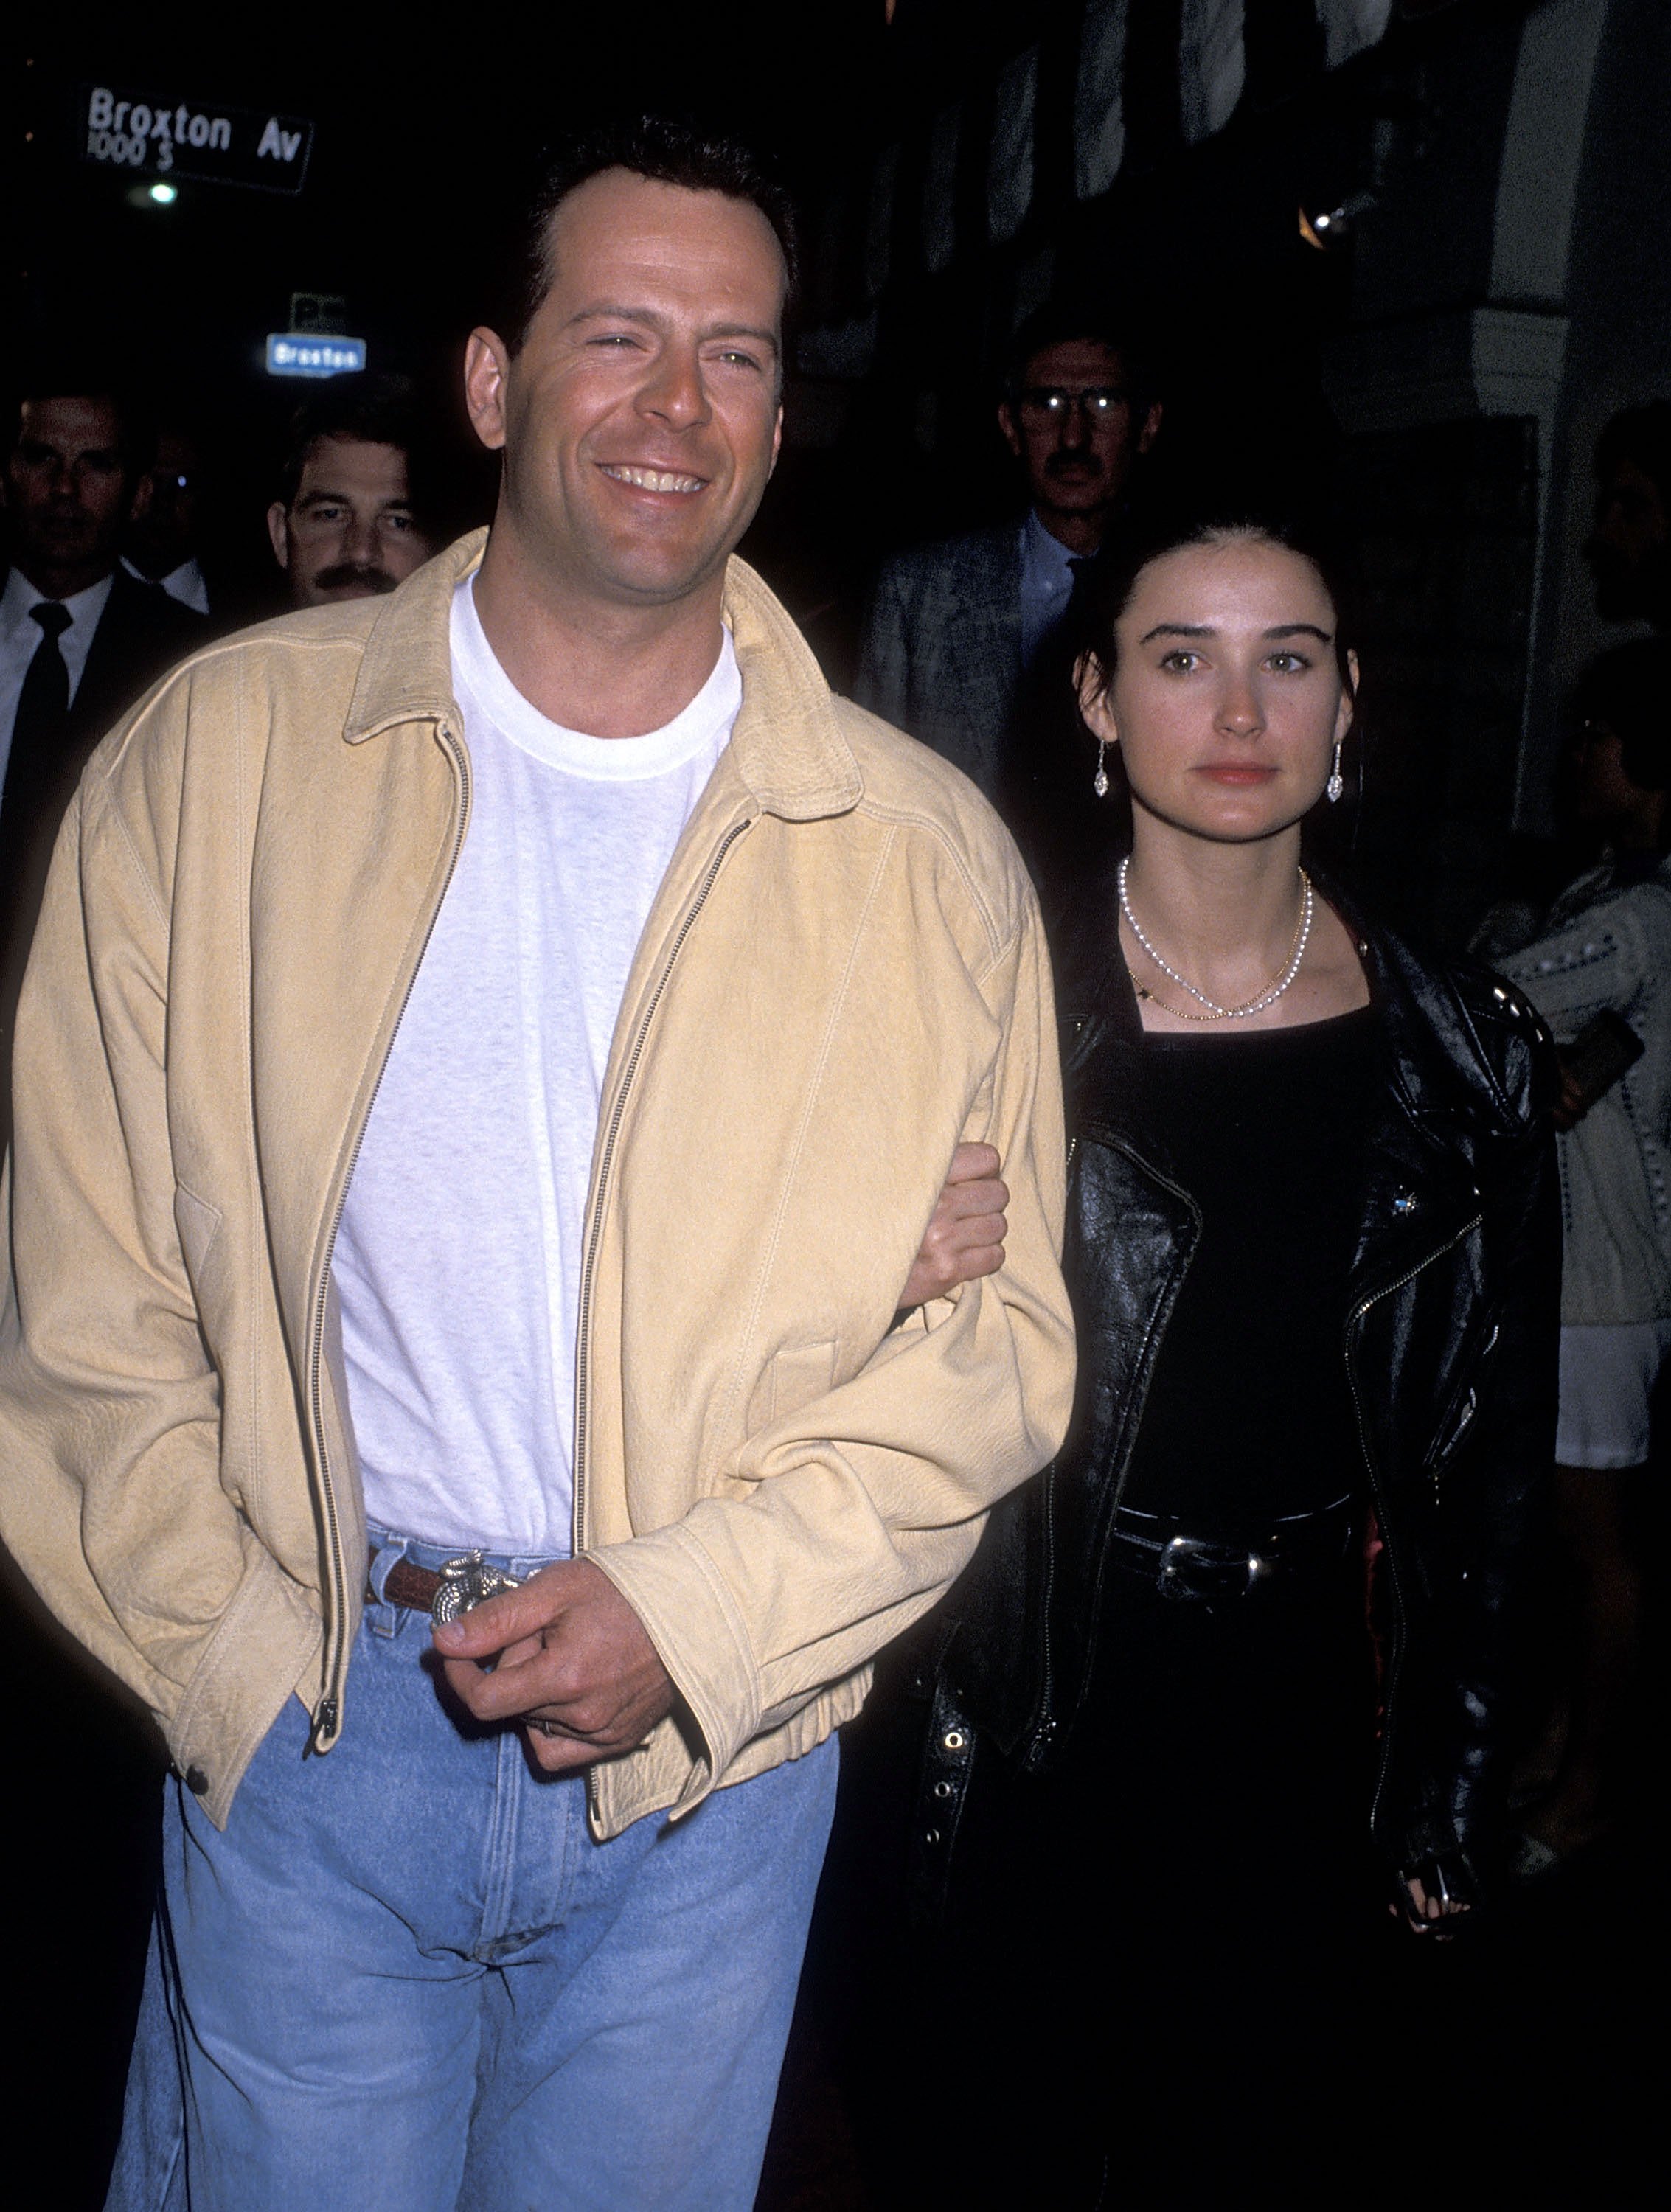 Bruce Willis and actress Demi Moore in 1989